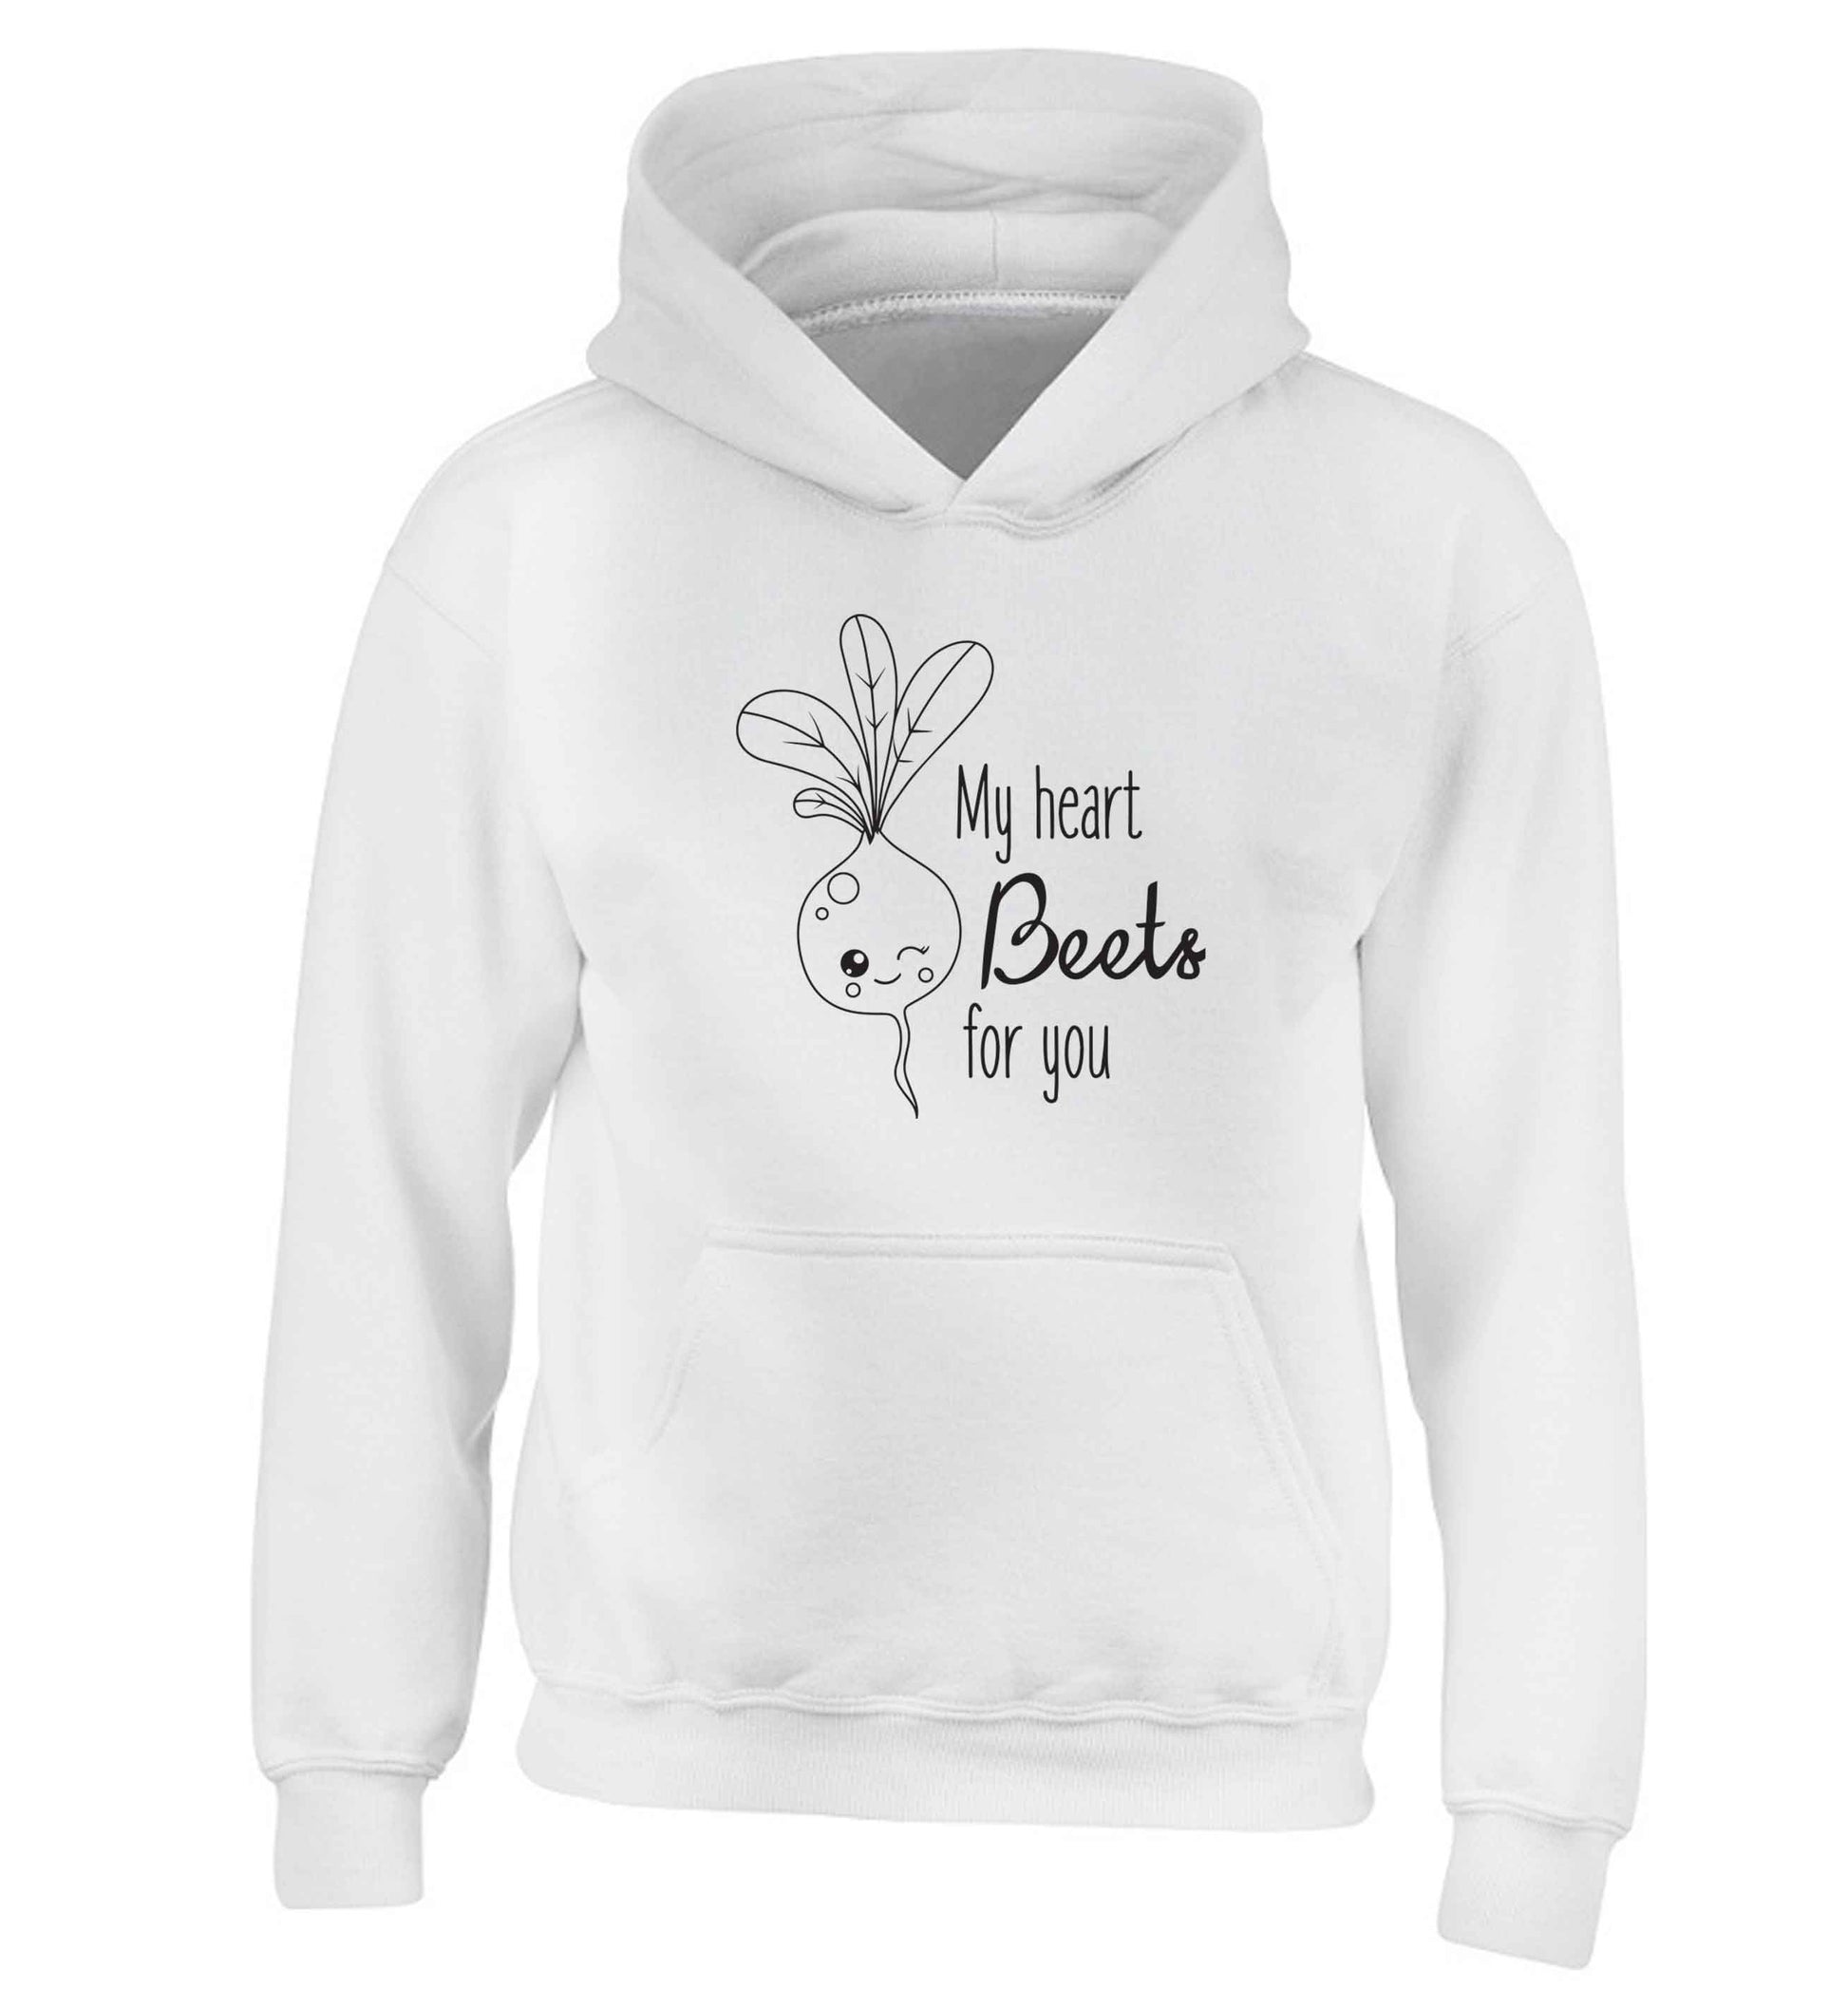 My heart beets for you children's white hoodie 12-13 Years